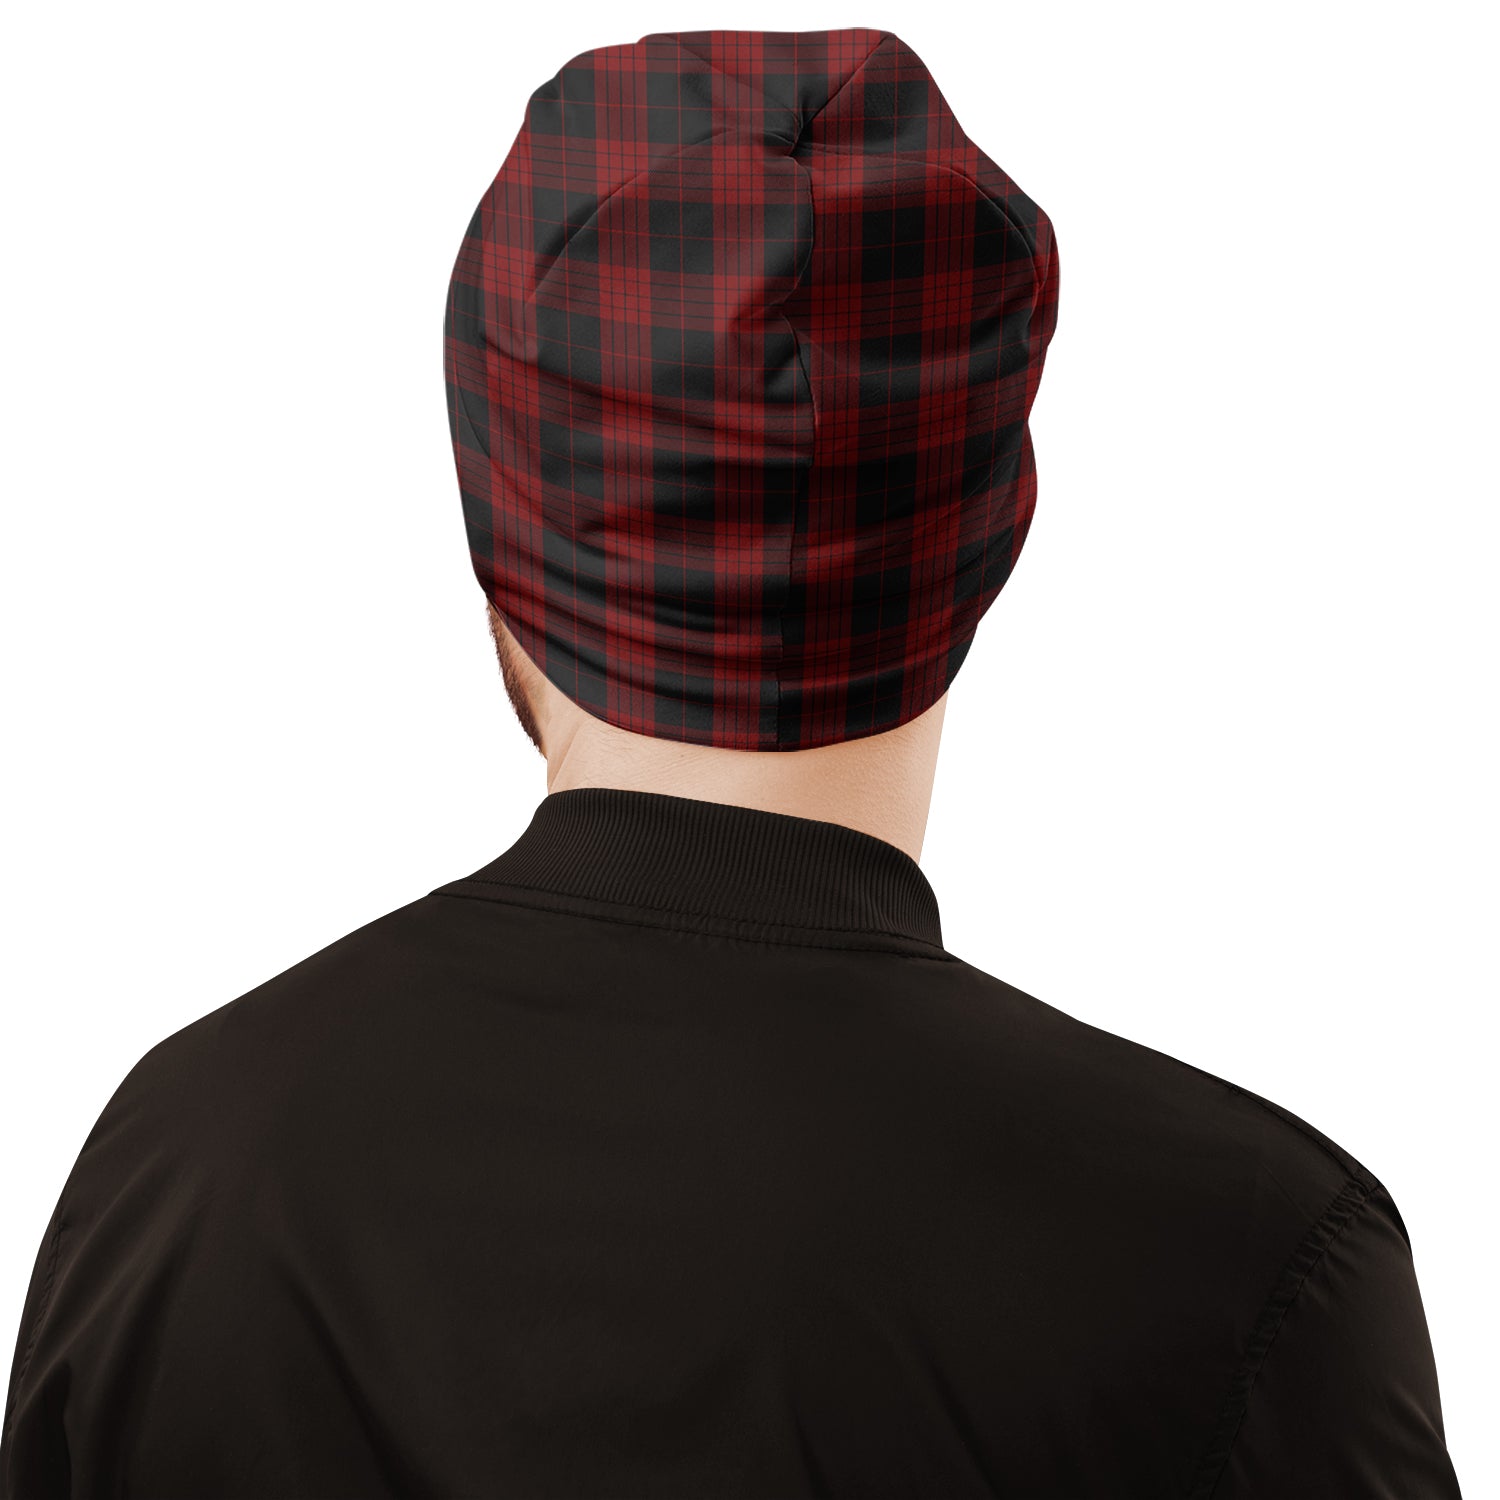 cameron-black-and-red-tartan-beanies-hat-with-family-crest